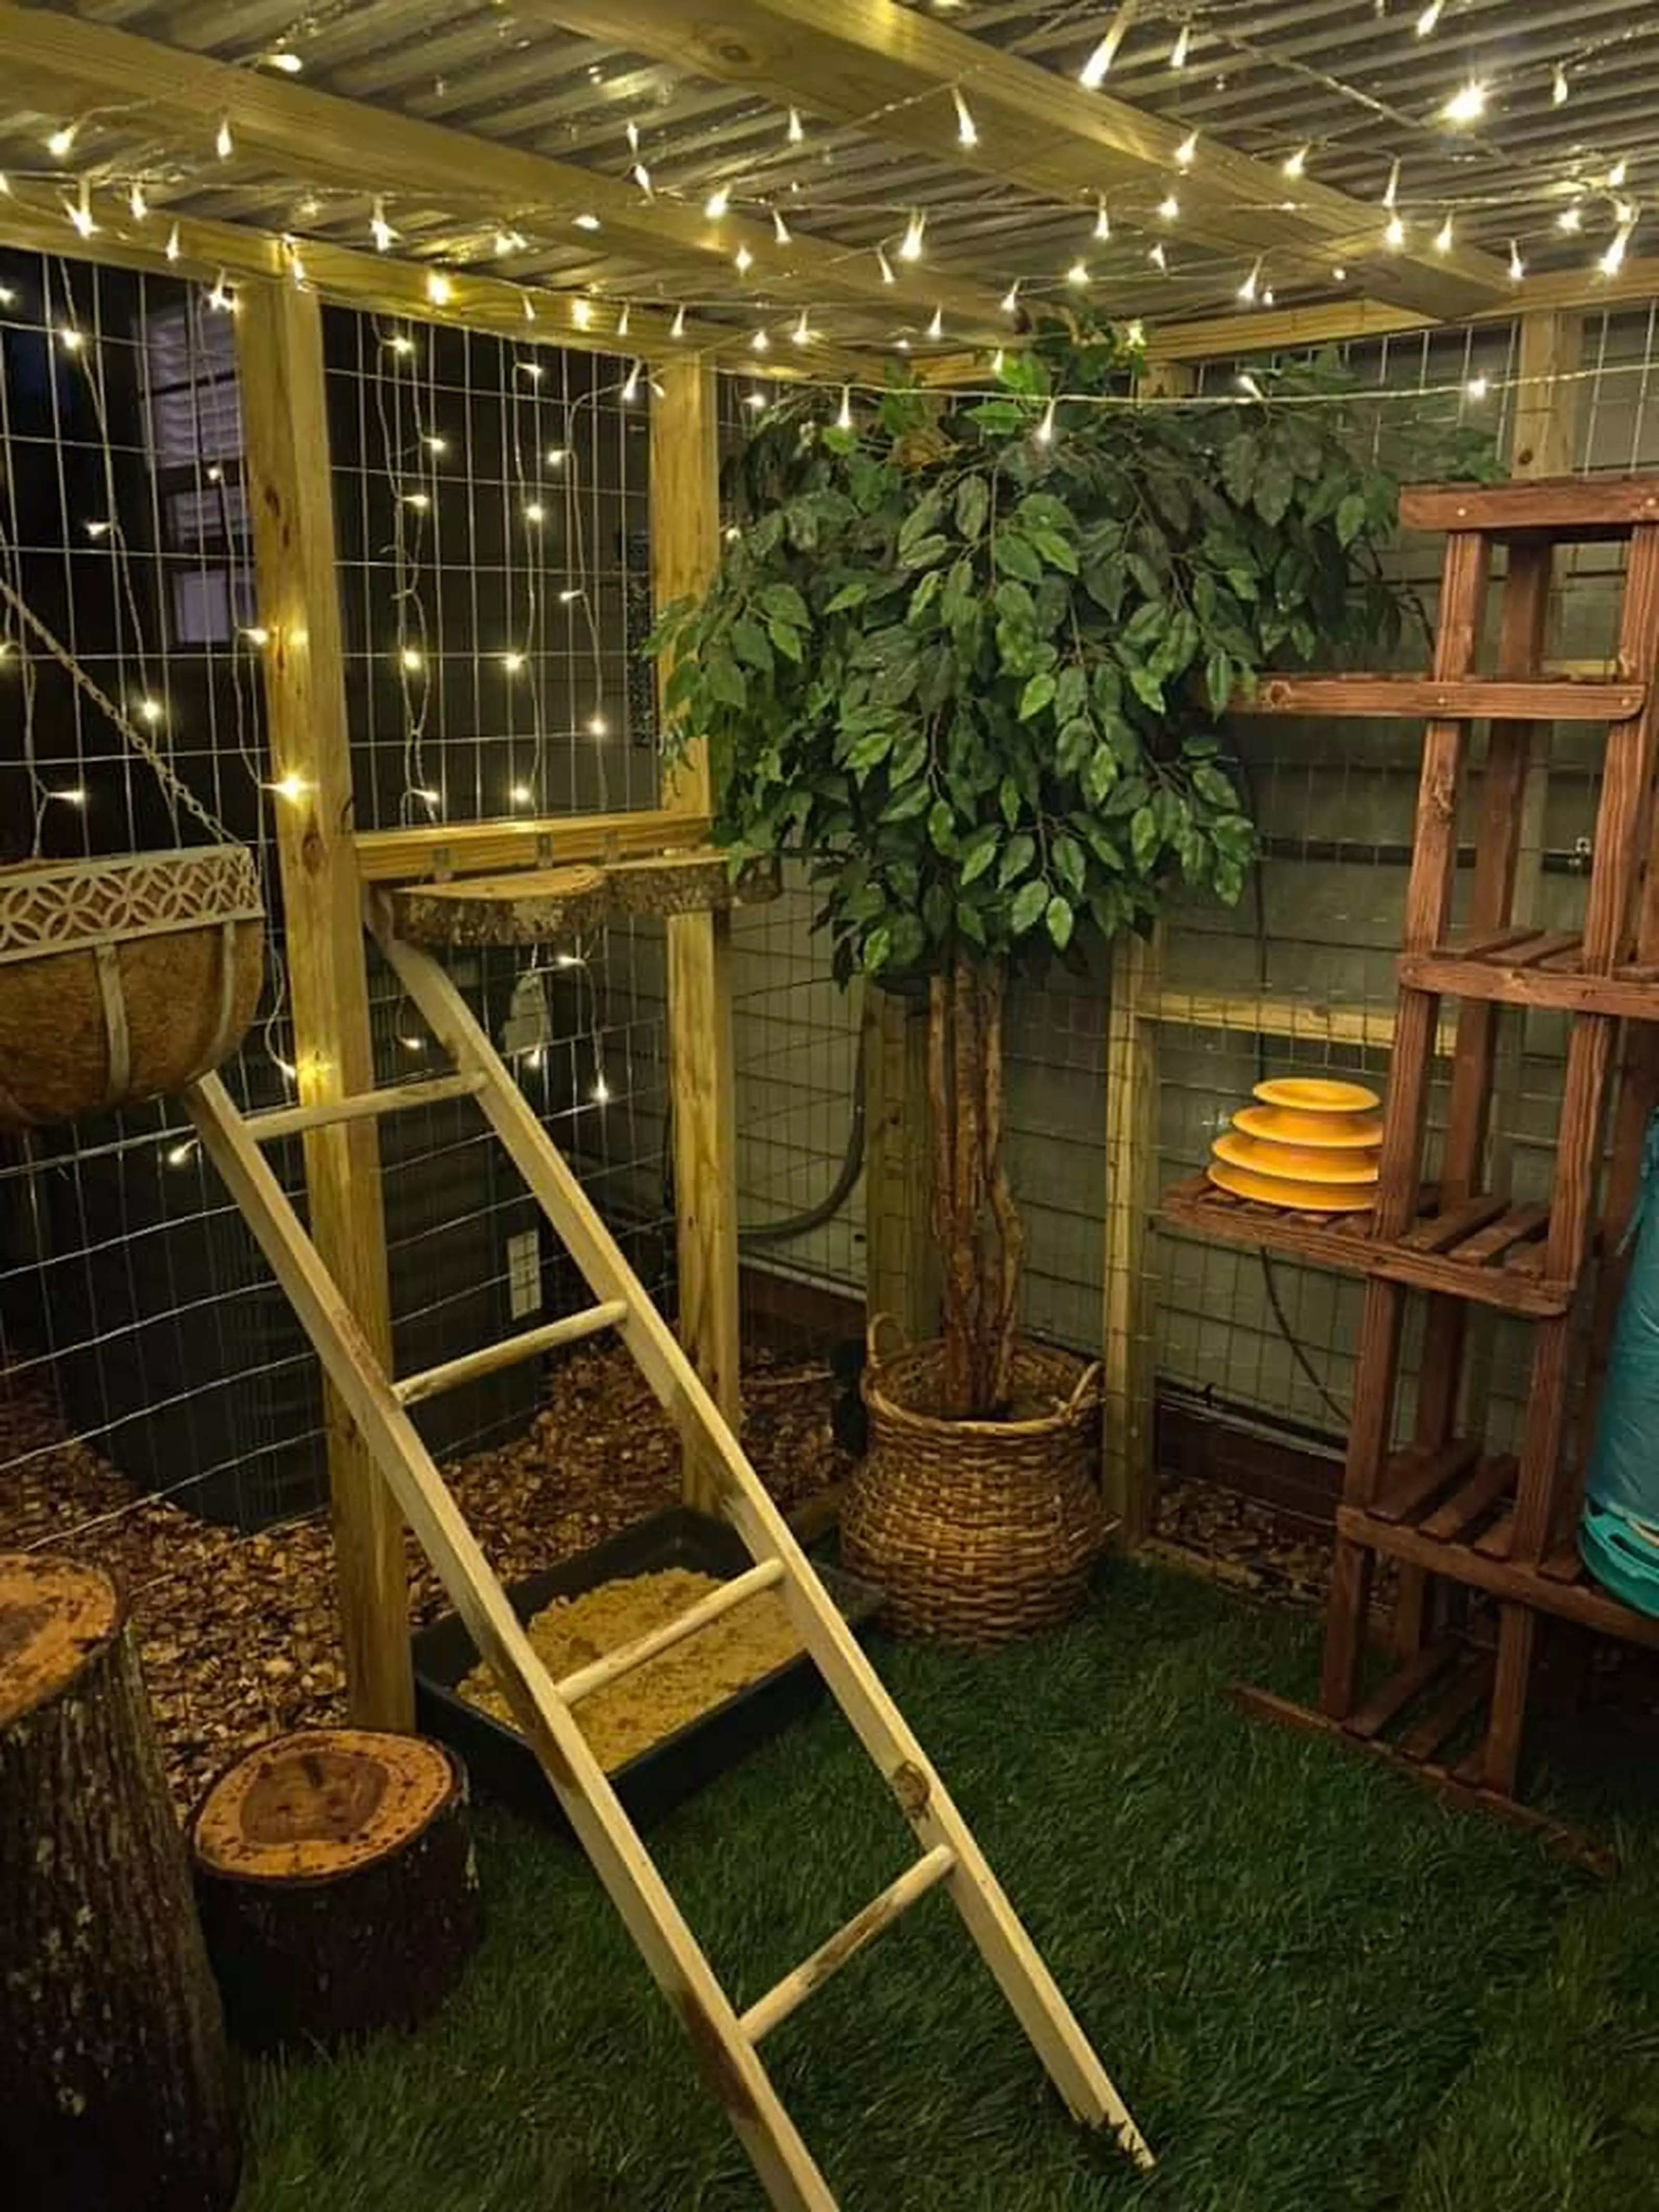 The kitty play area includes platforms and ladders (